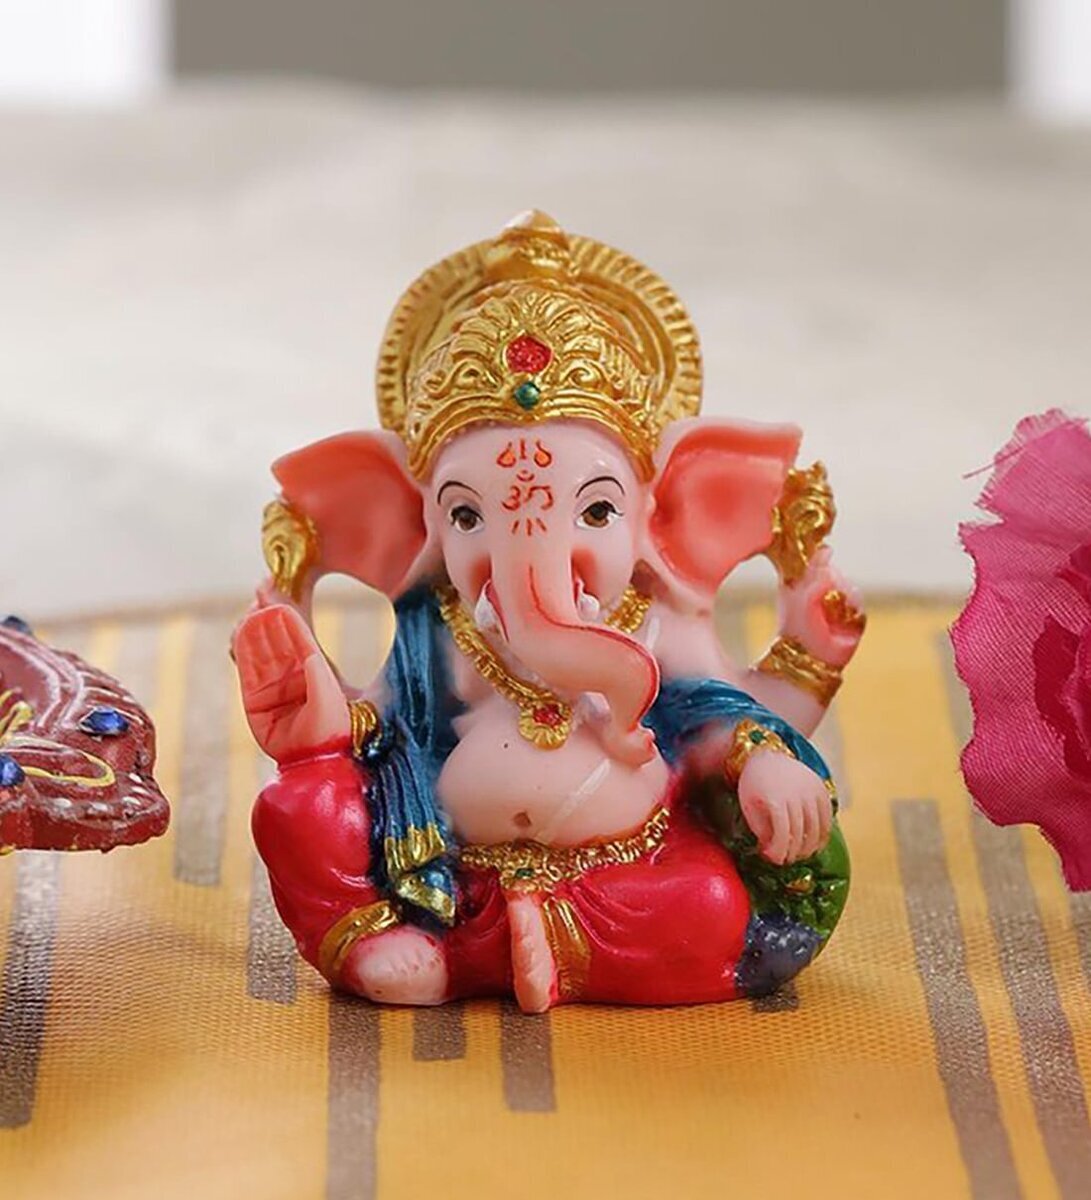 The Ultimate Collection of 4K Ganpati Murti Images - Over 999 Stunning ...